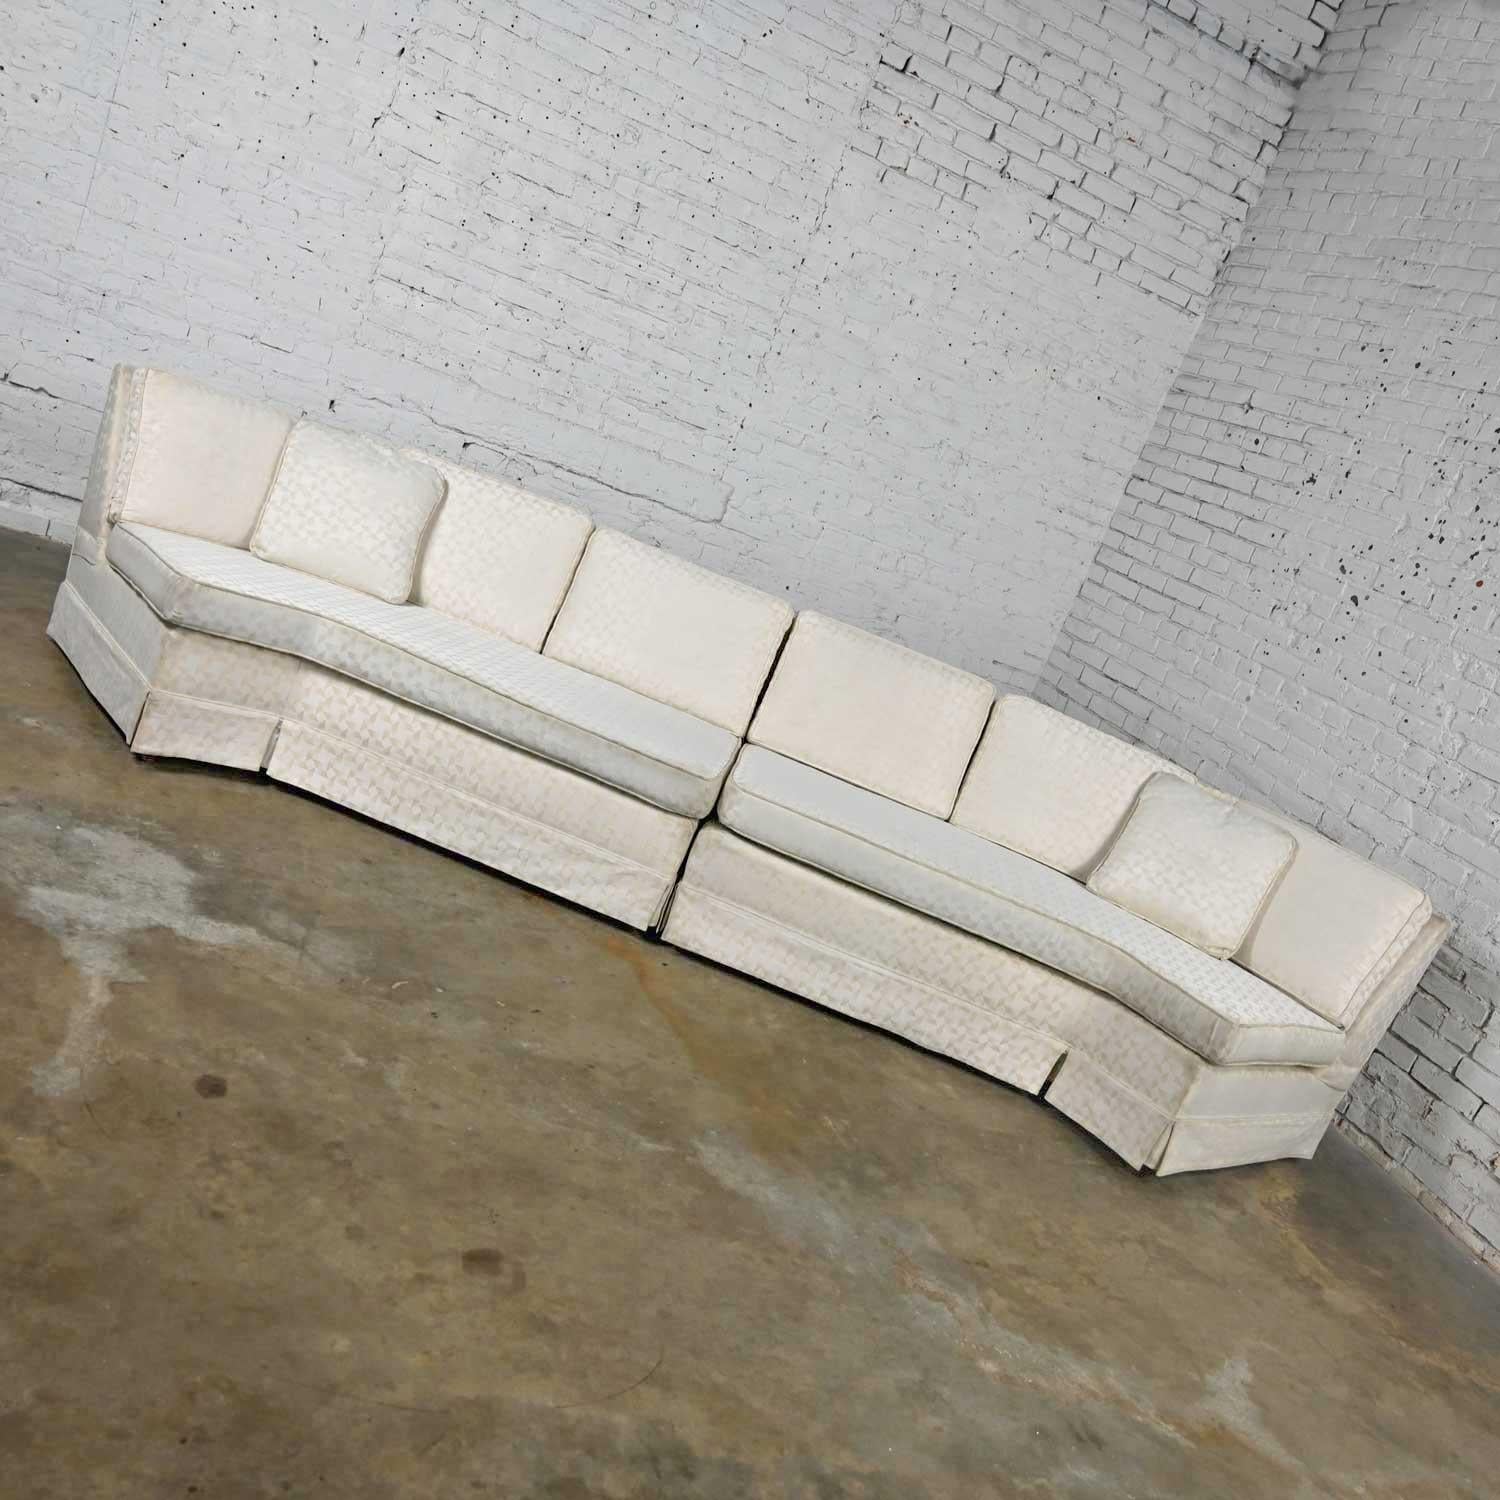 Stunning Mid-Century Modern to modern & Hollywood Regency white fabric two piece angled sectional sofa with square tapered wood legs. Beautiful condition, keeping in mind that this is vintage and not new so will have signs of use and wear. It has